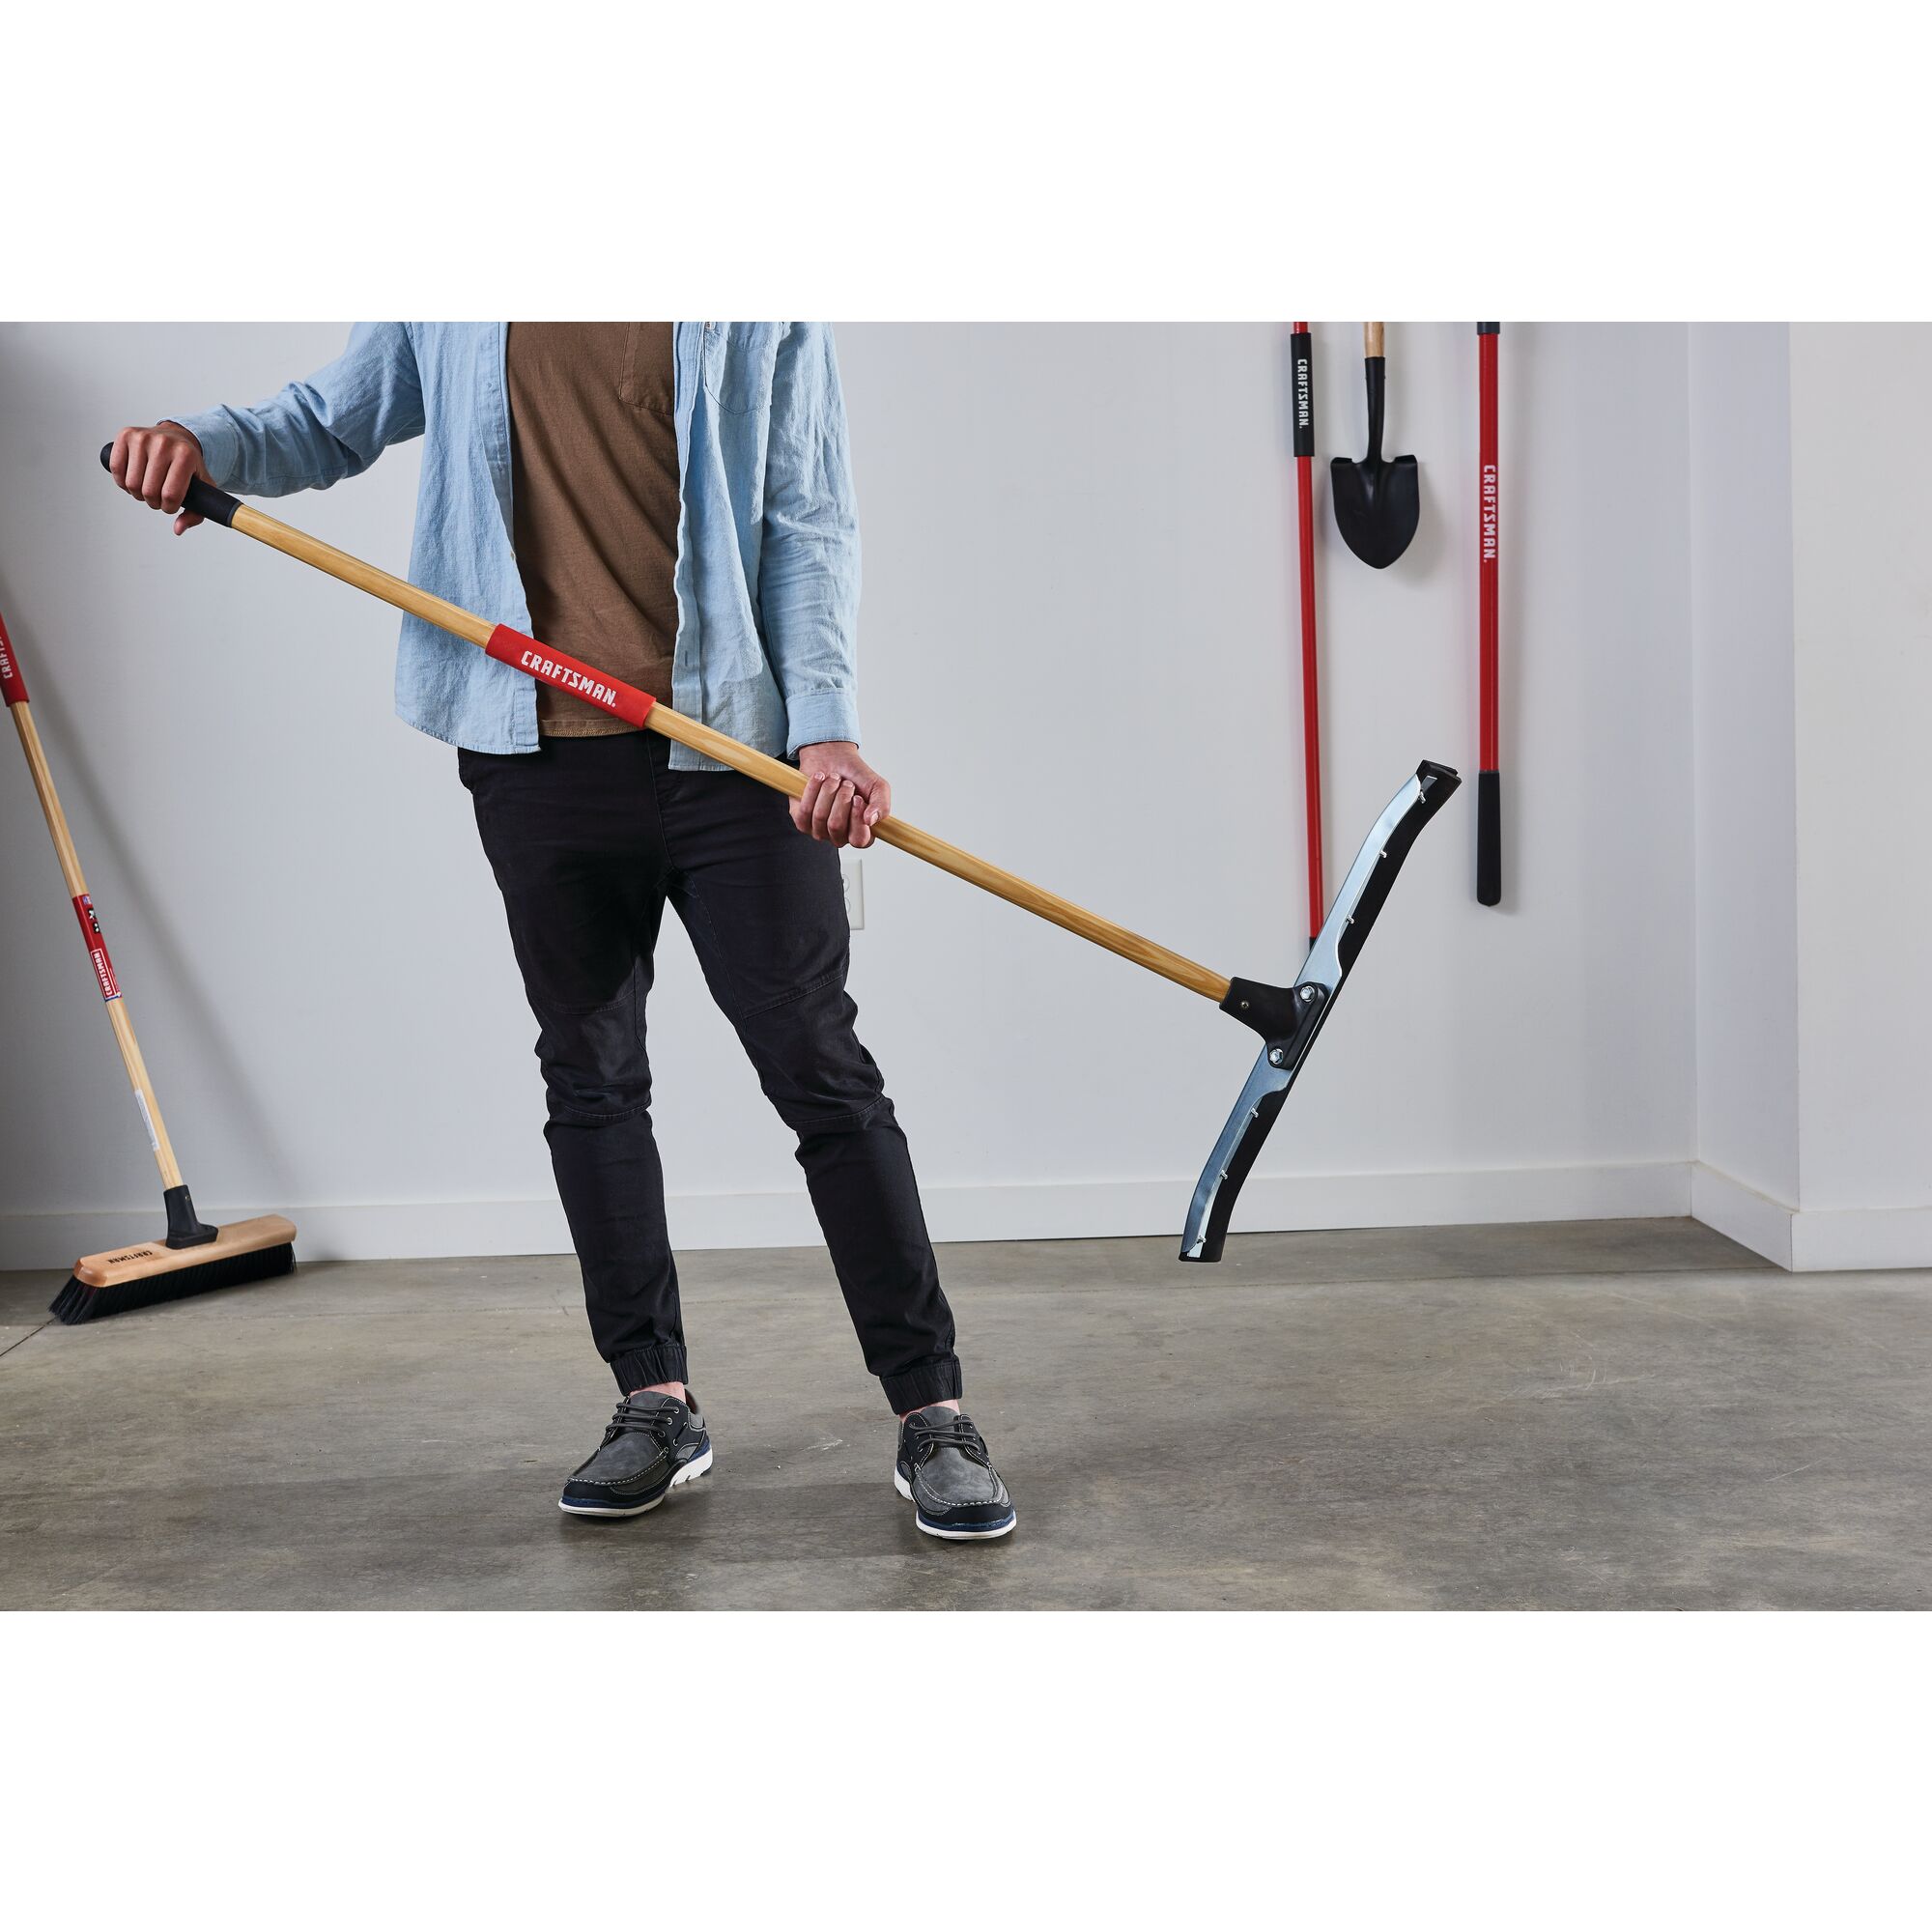 24 inch dual blade floor squeegee being used in a room.